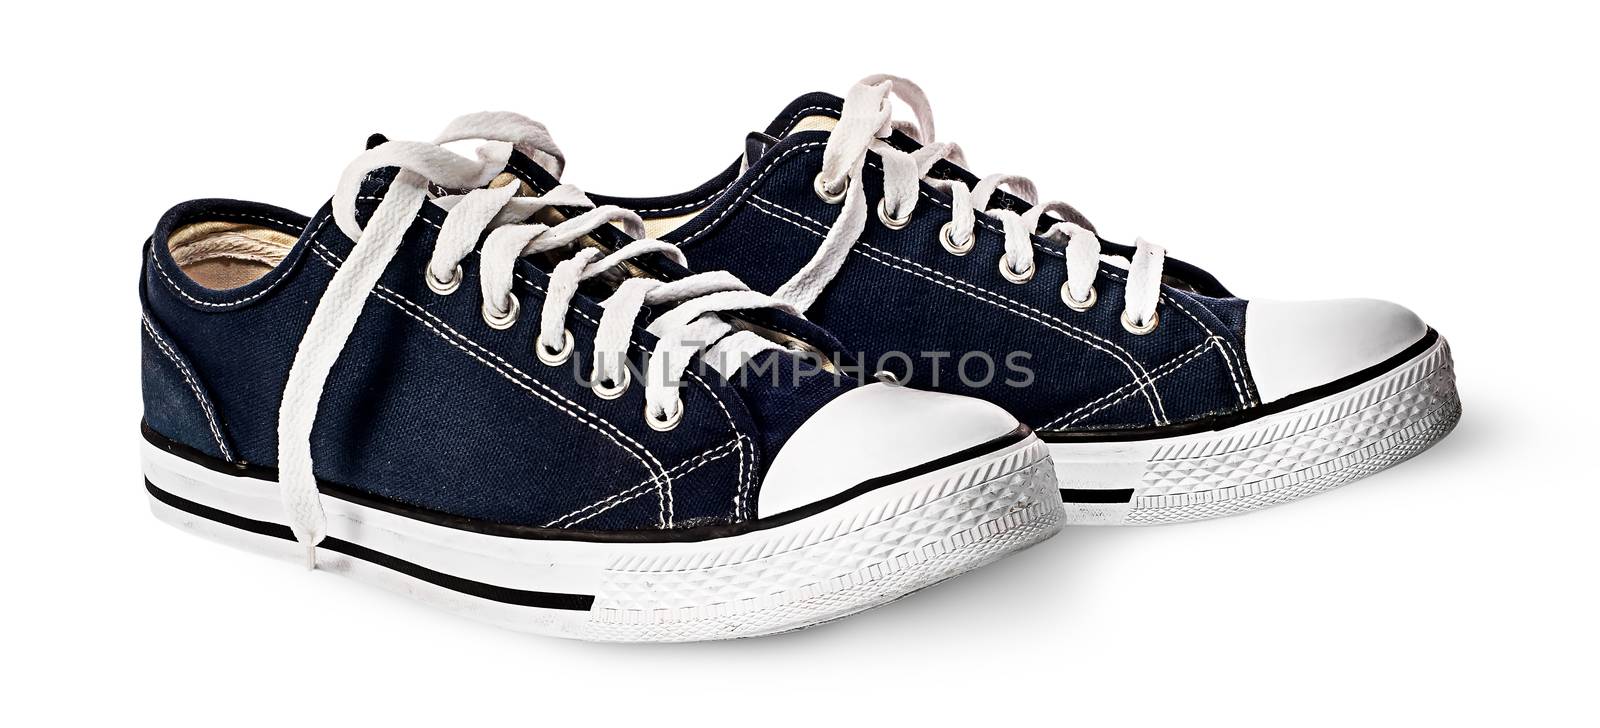 One pair of dark blue sports shoes beside by Cipariss